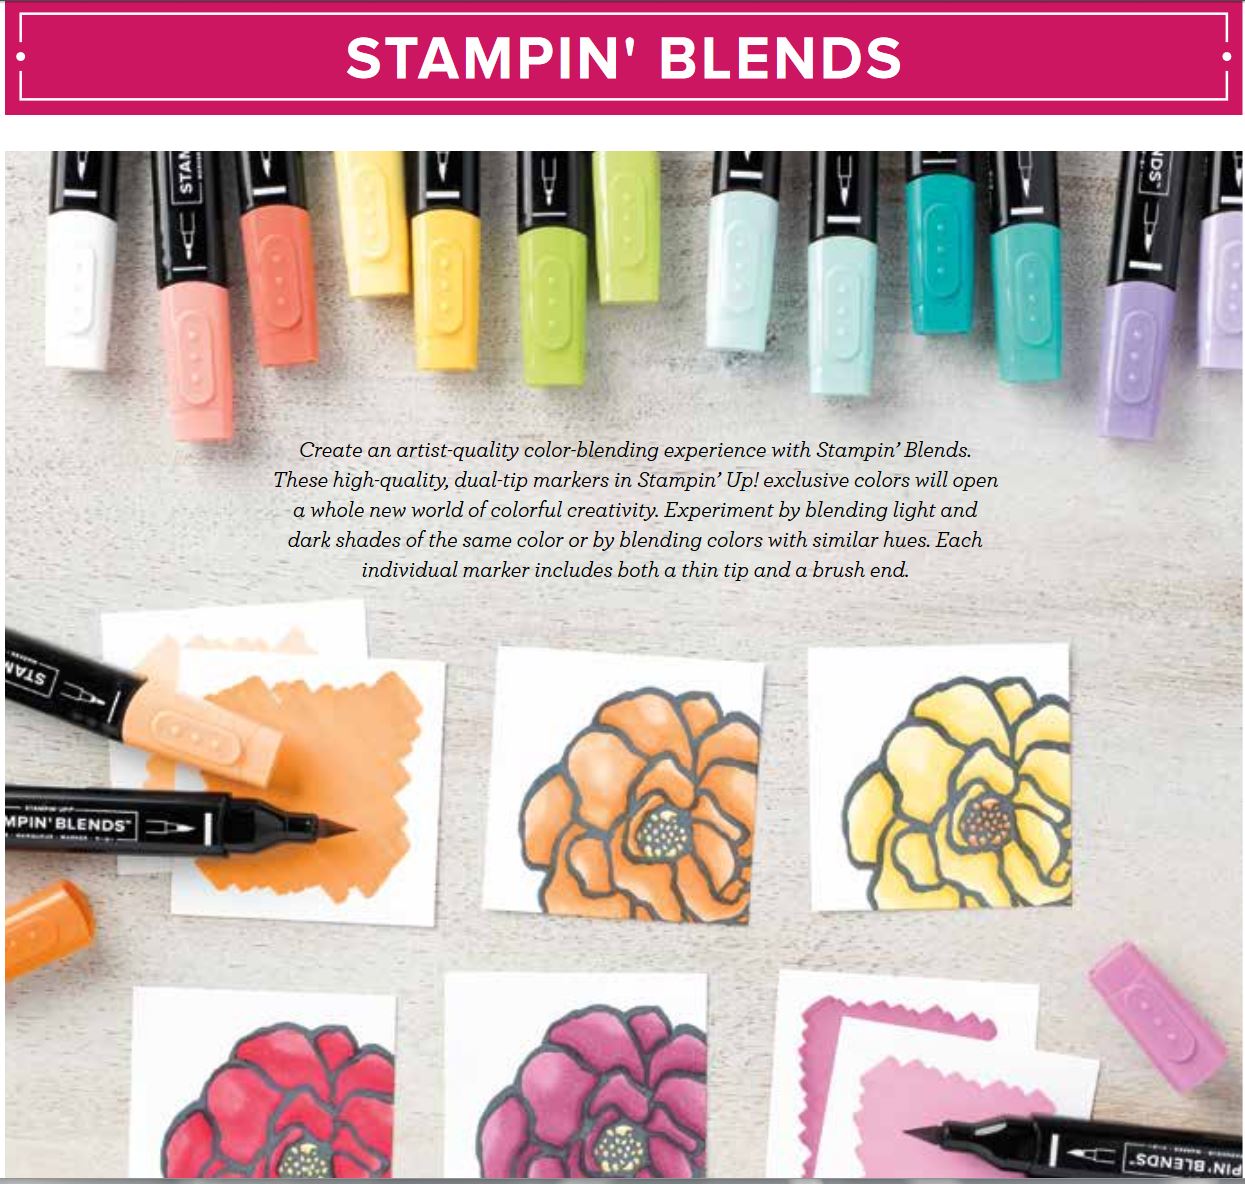 Stampin' blends with wendy lee,stampin Up, coloring, alcohol markers, #creativeleeyours, creatively yours, creative-lee yours, handmade, paper crafts, new product, free case inserts